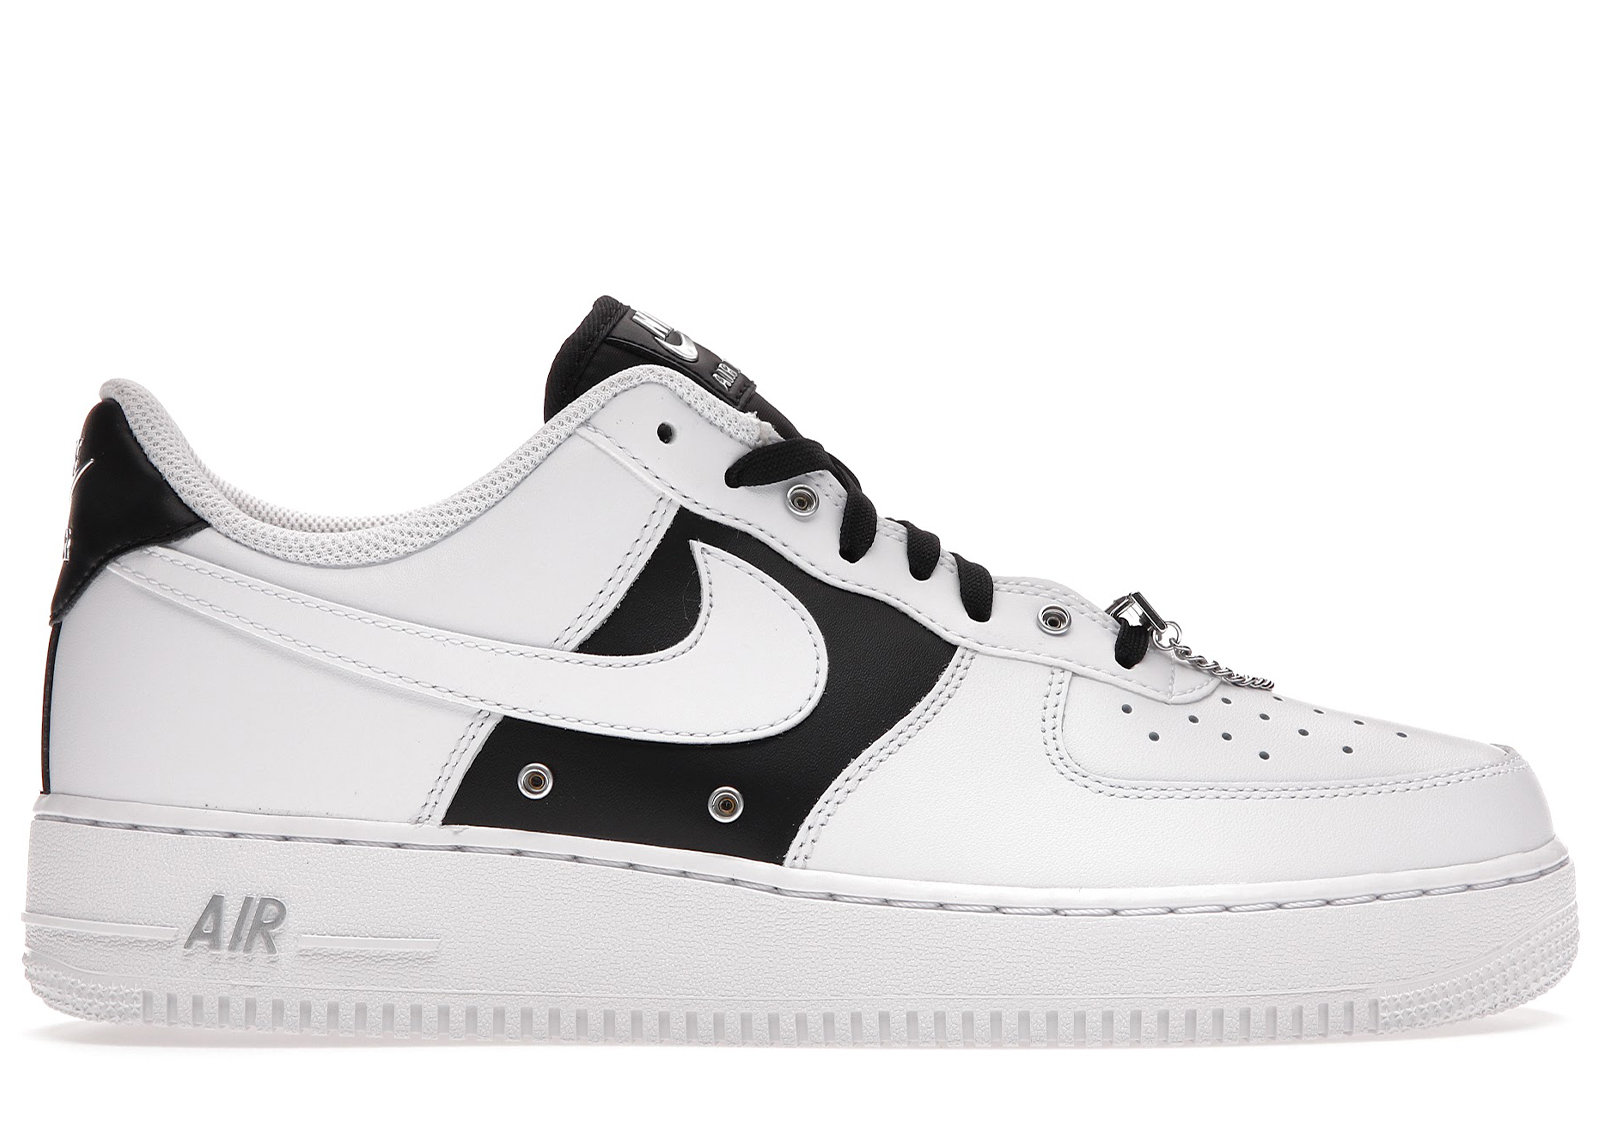 nike air force 1 white and silver